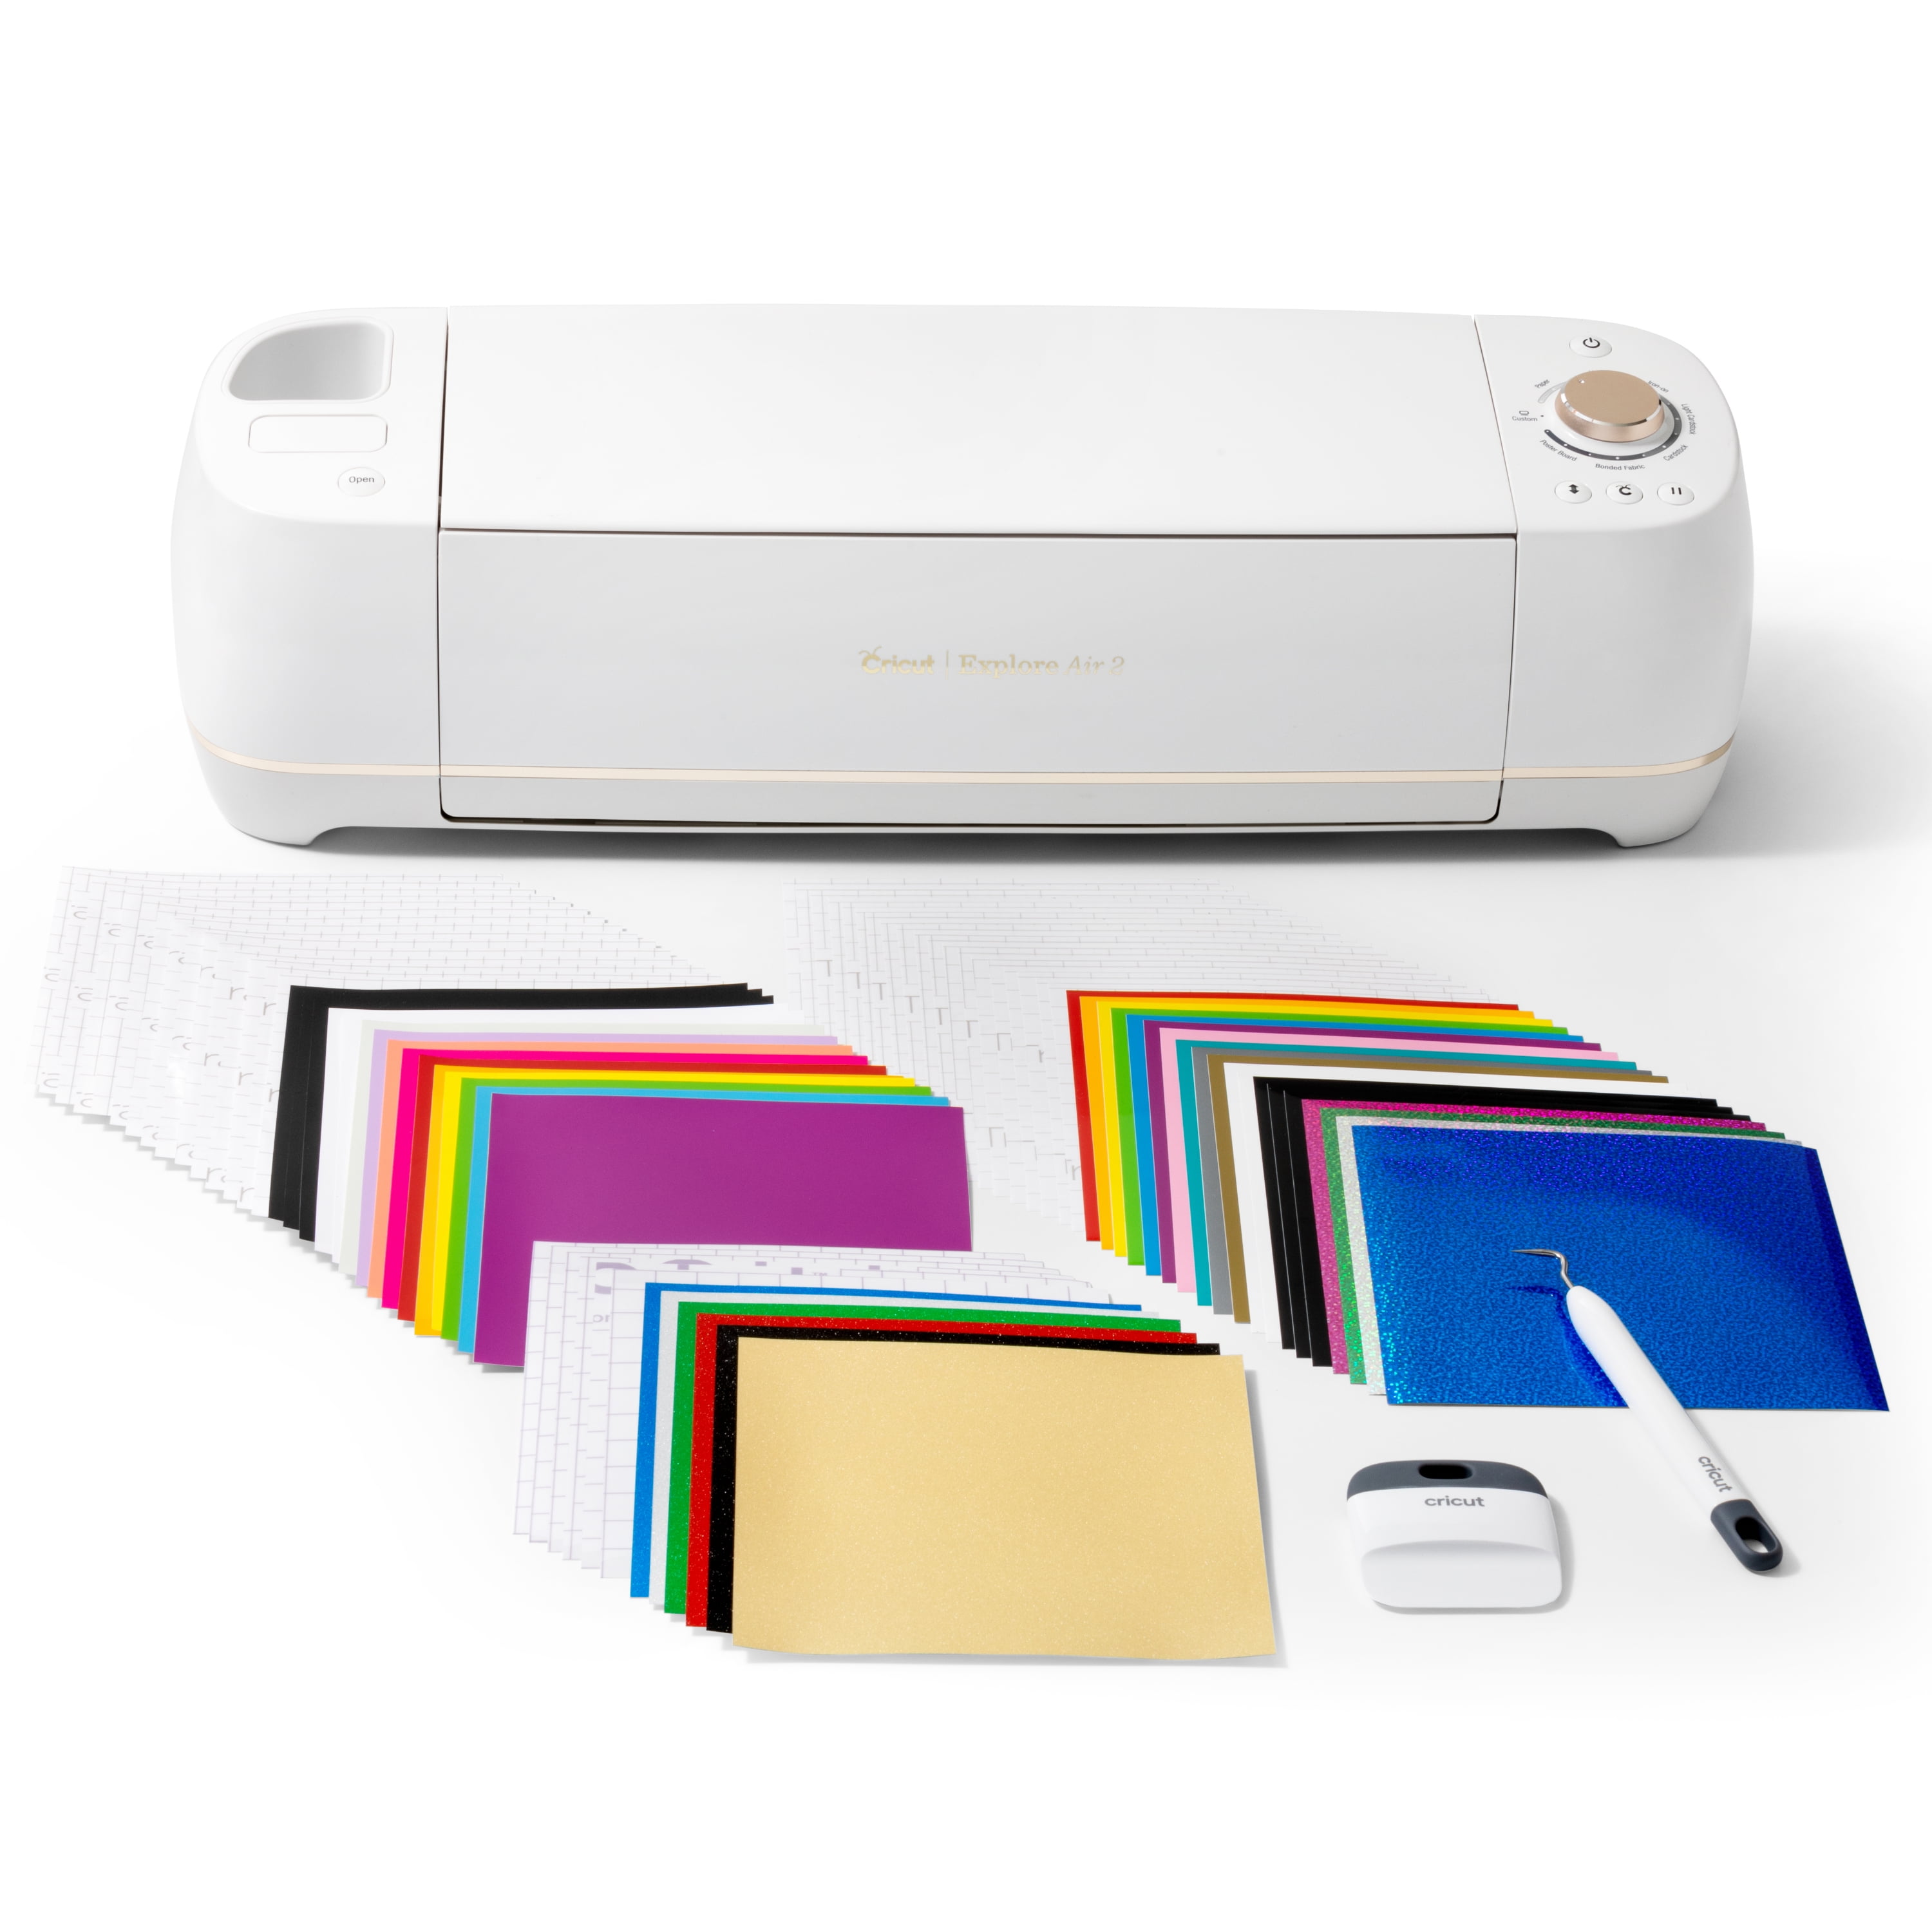 Cricut Explore Air 2 Machine: Its Functions and Accessories